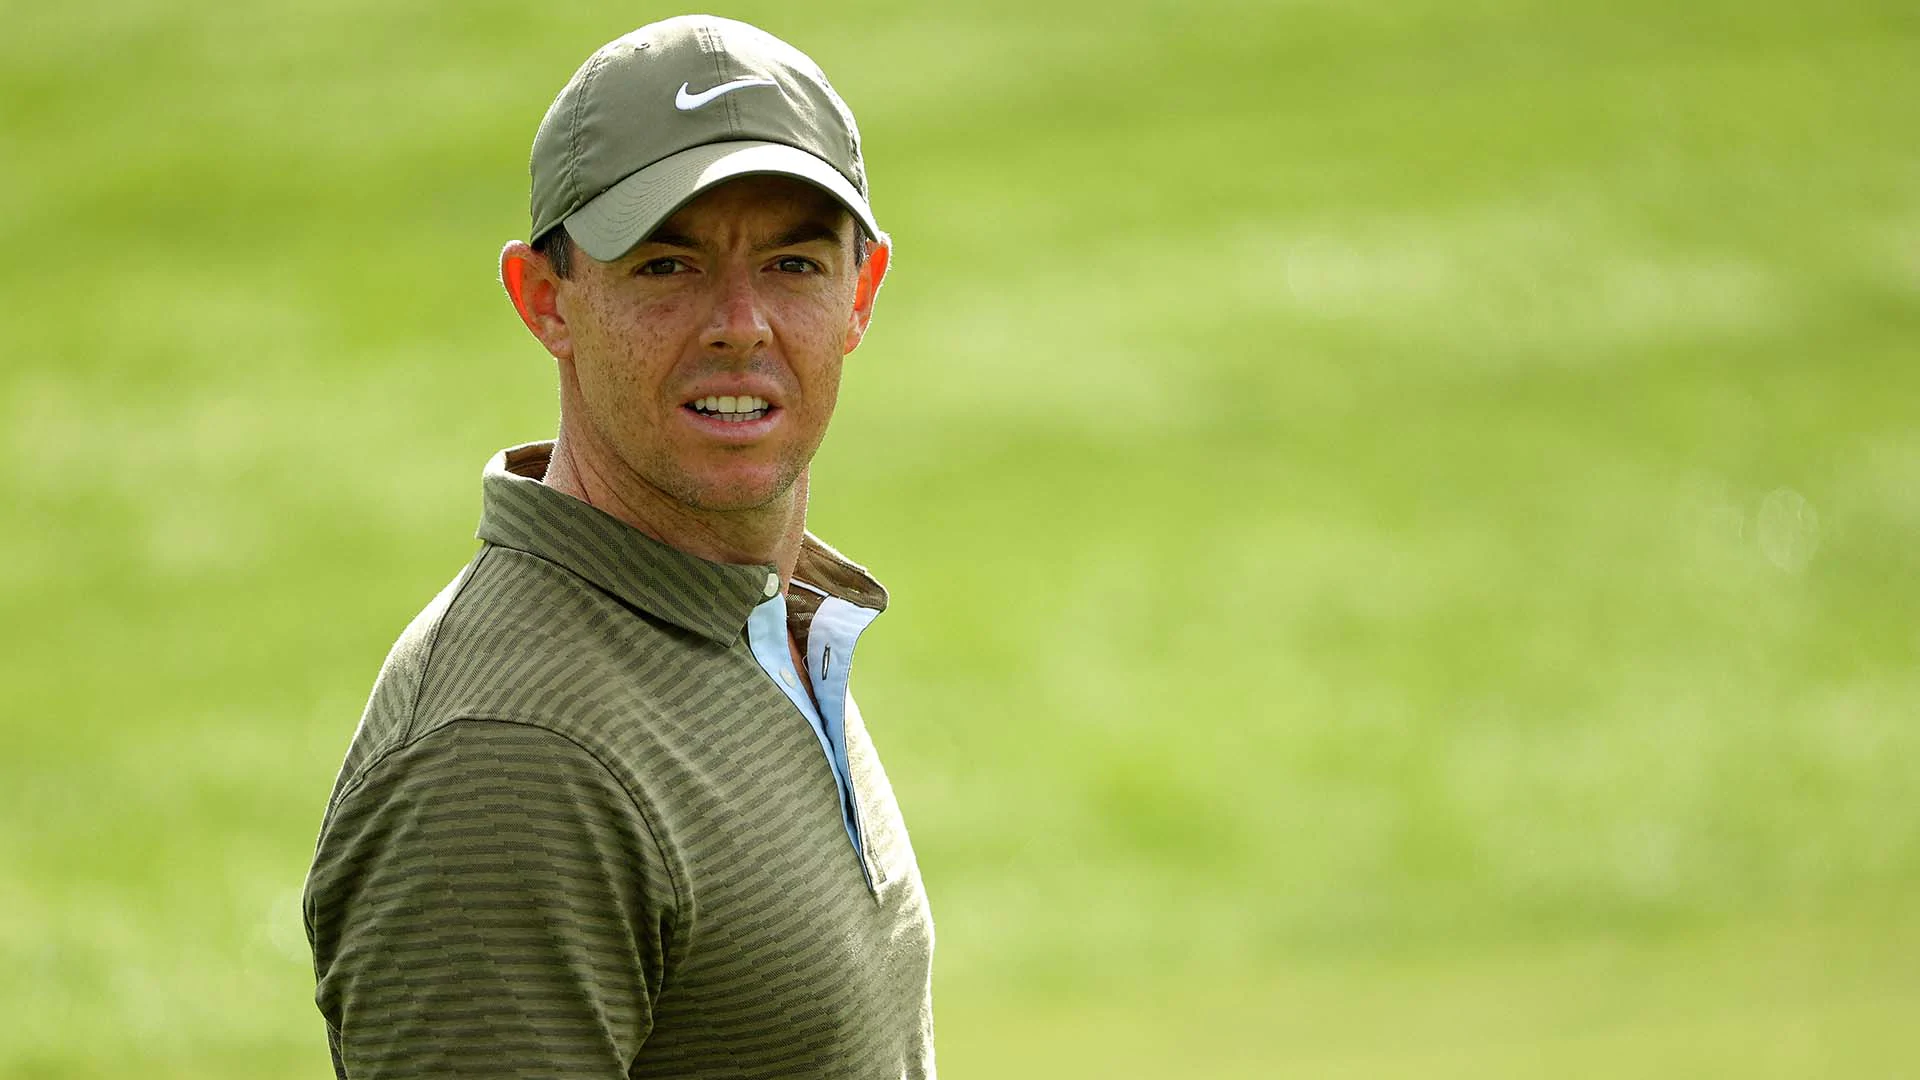 From WTH?! to 66, Rory McIlroy still has a chance at this Masters